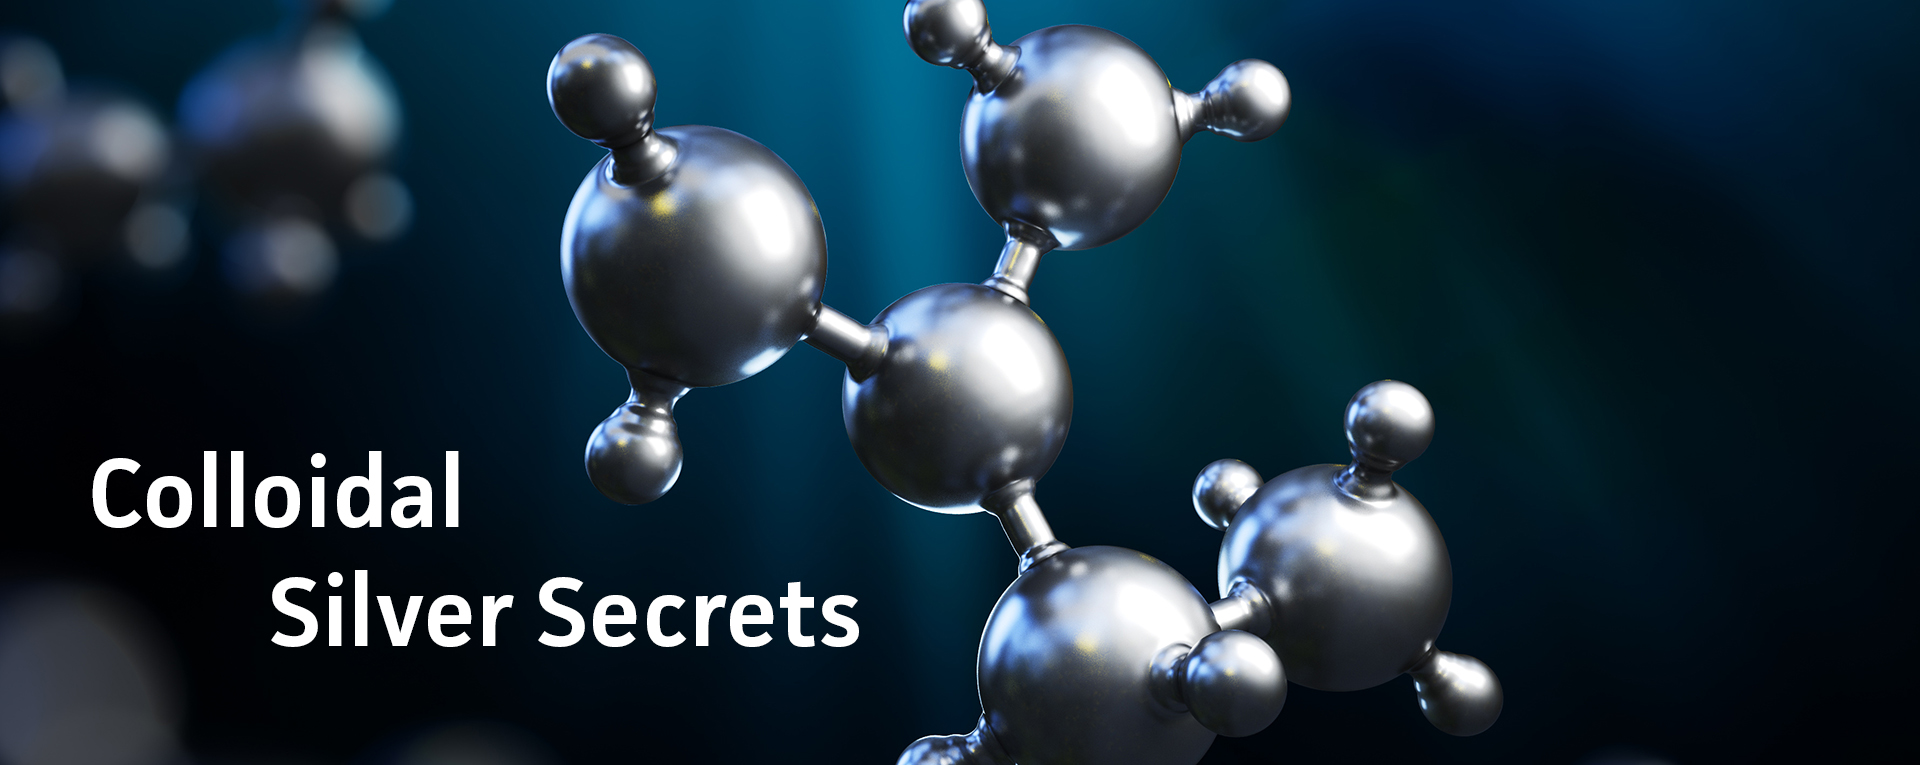 Colloidal Silver Secrets: Colloidal Silver and Its Many Documented Uses